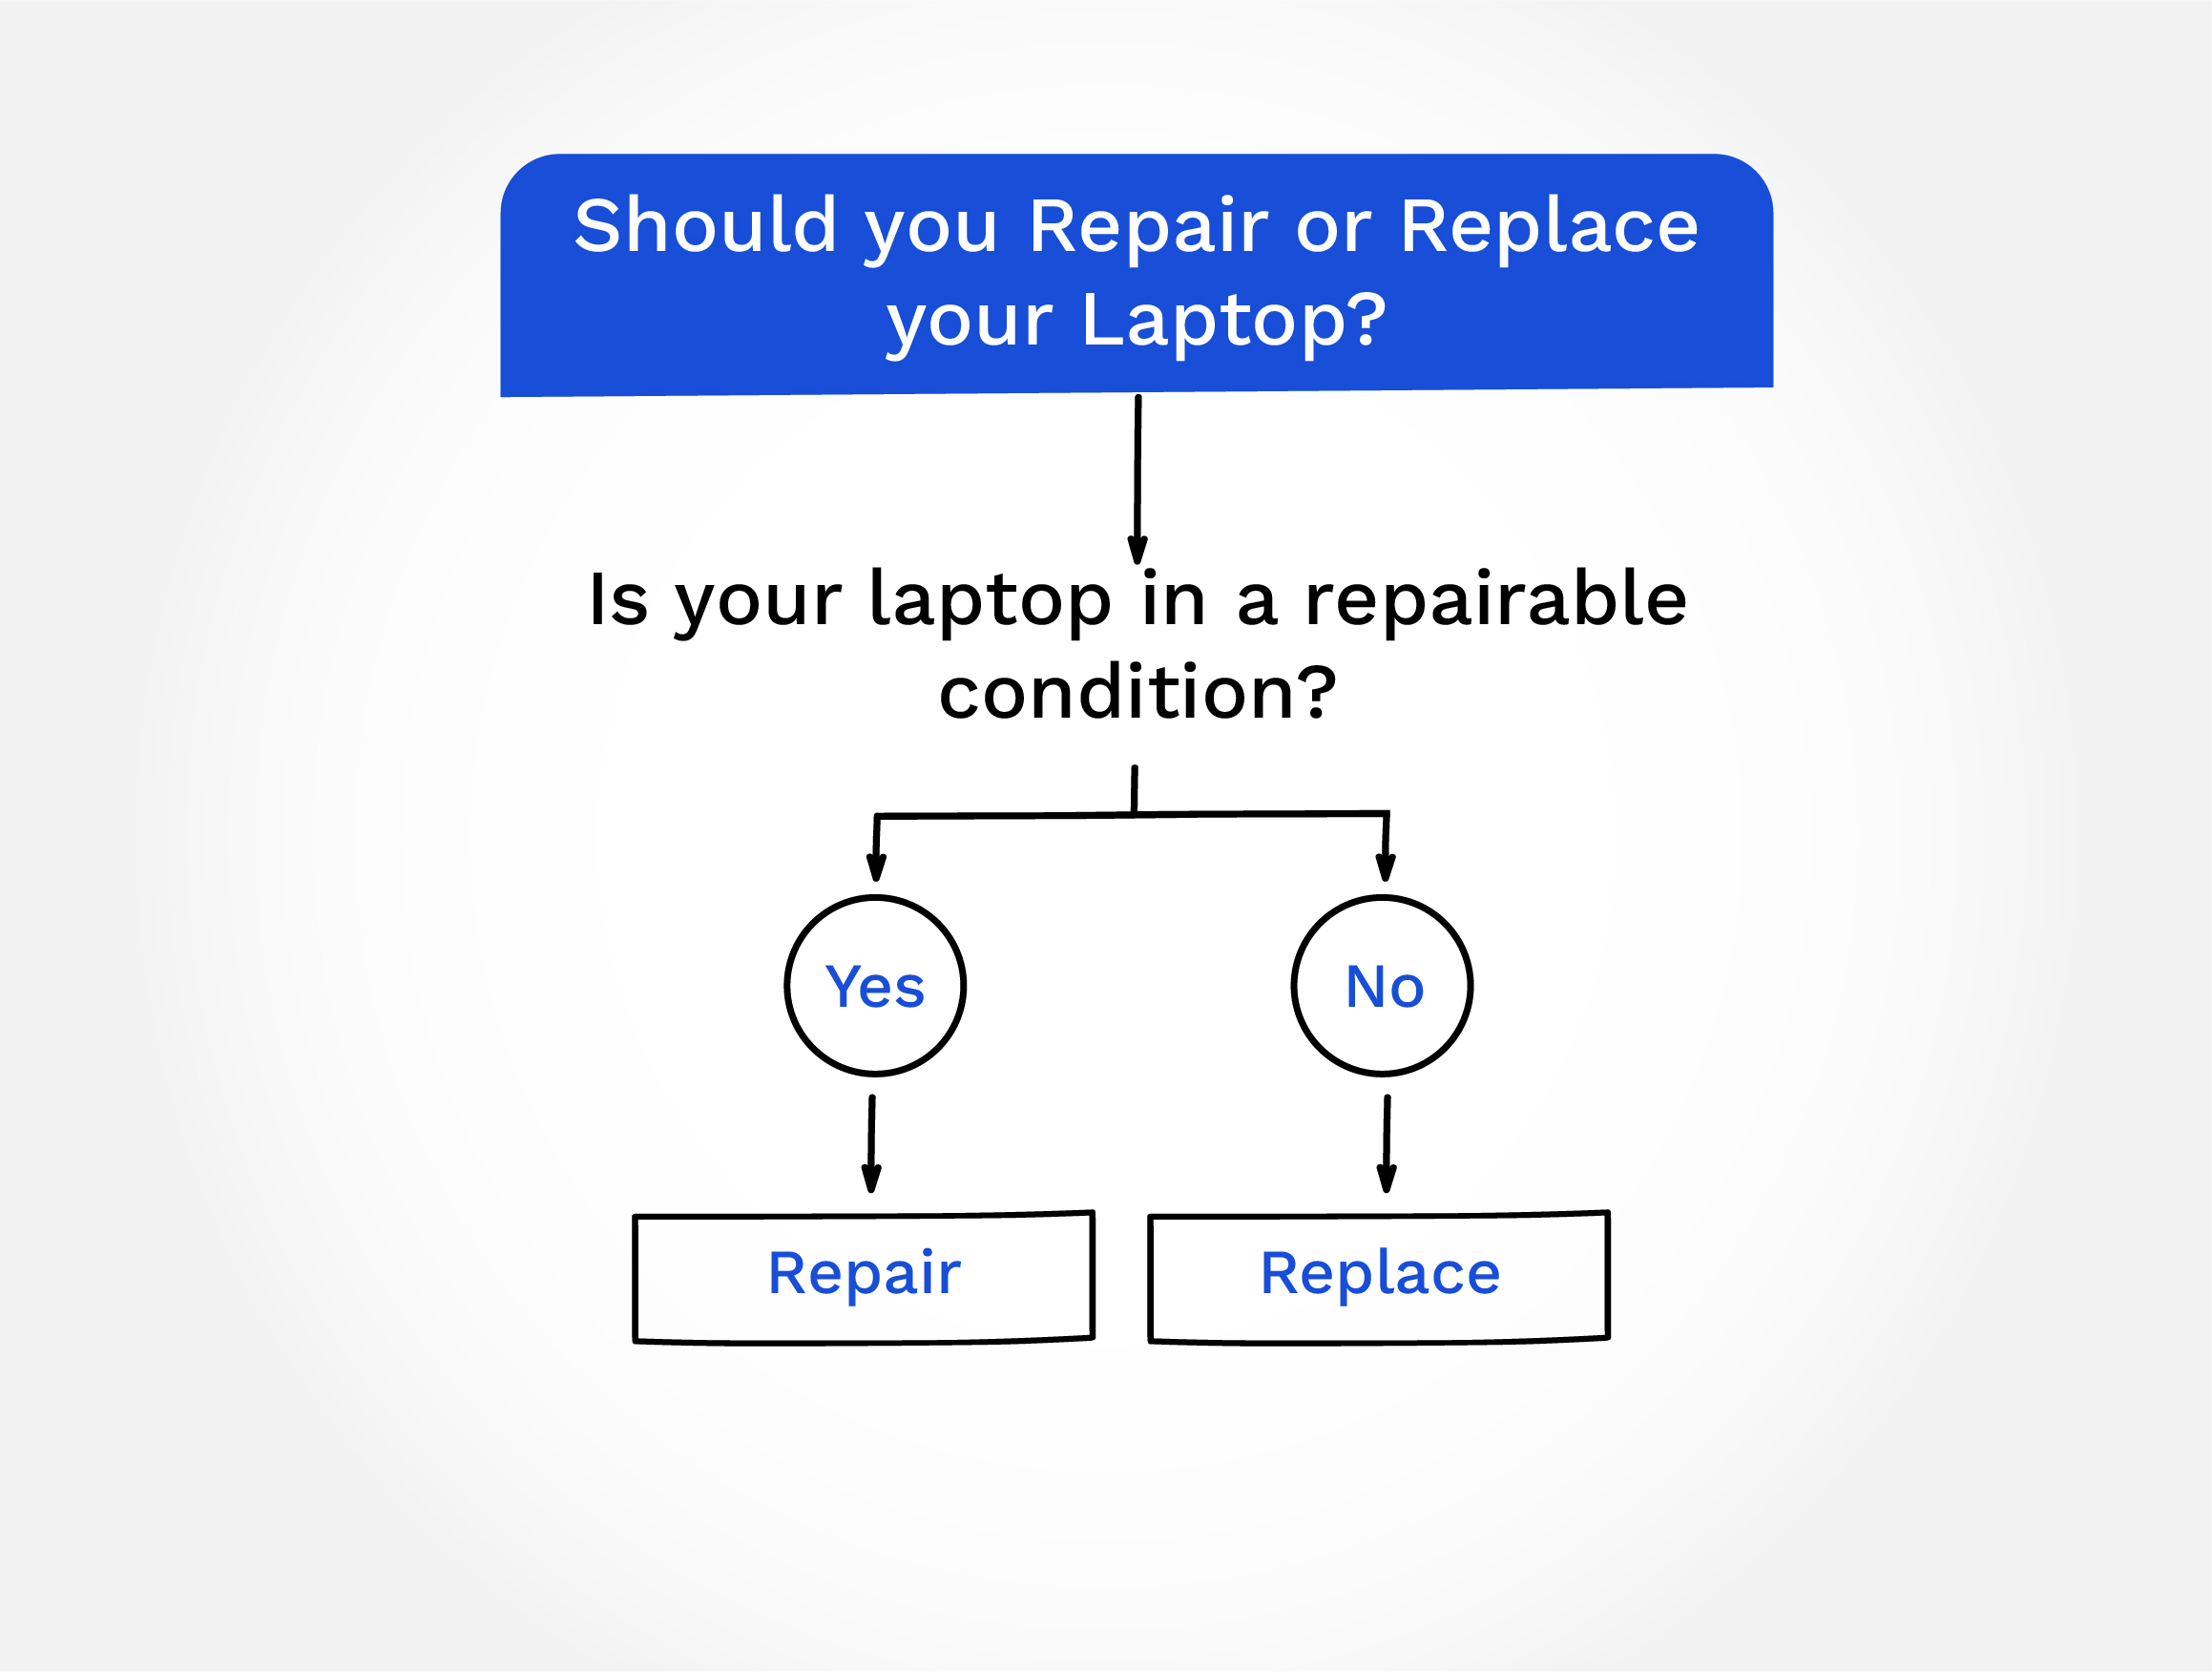 Is Your Laptop in a Repairable Condition?